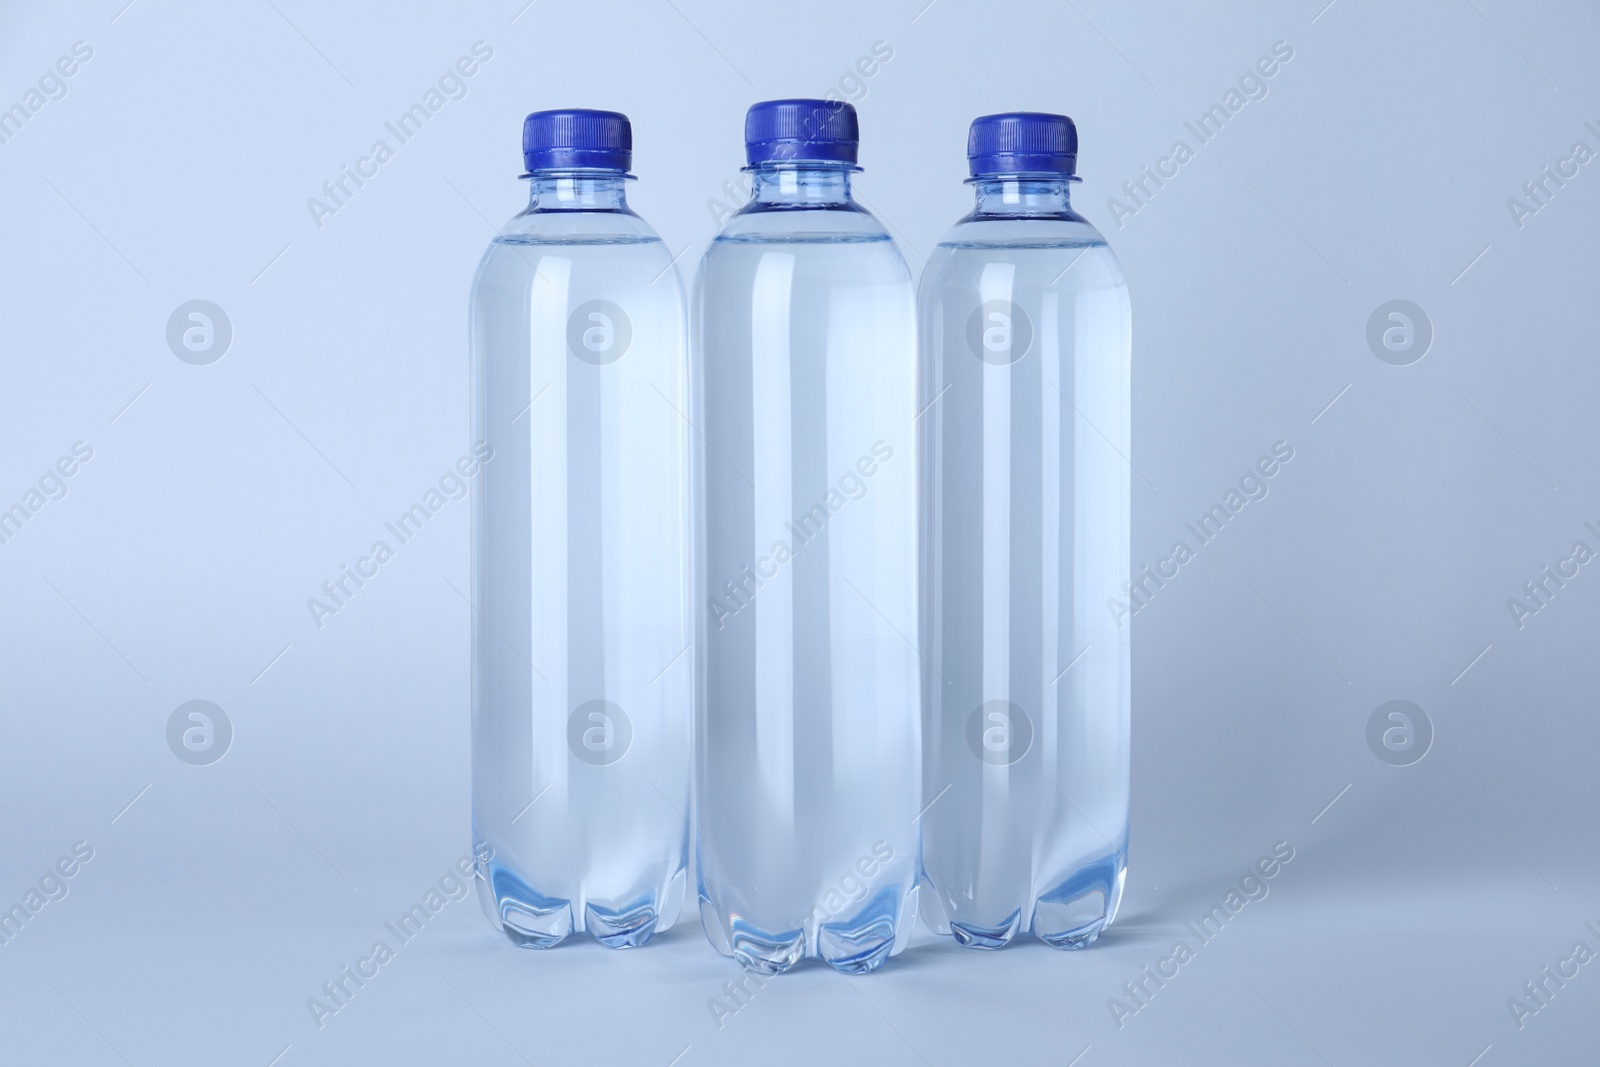 Photo of Plastic bottles with water on white background